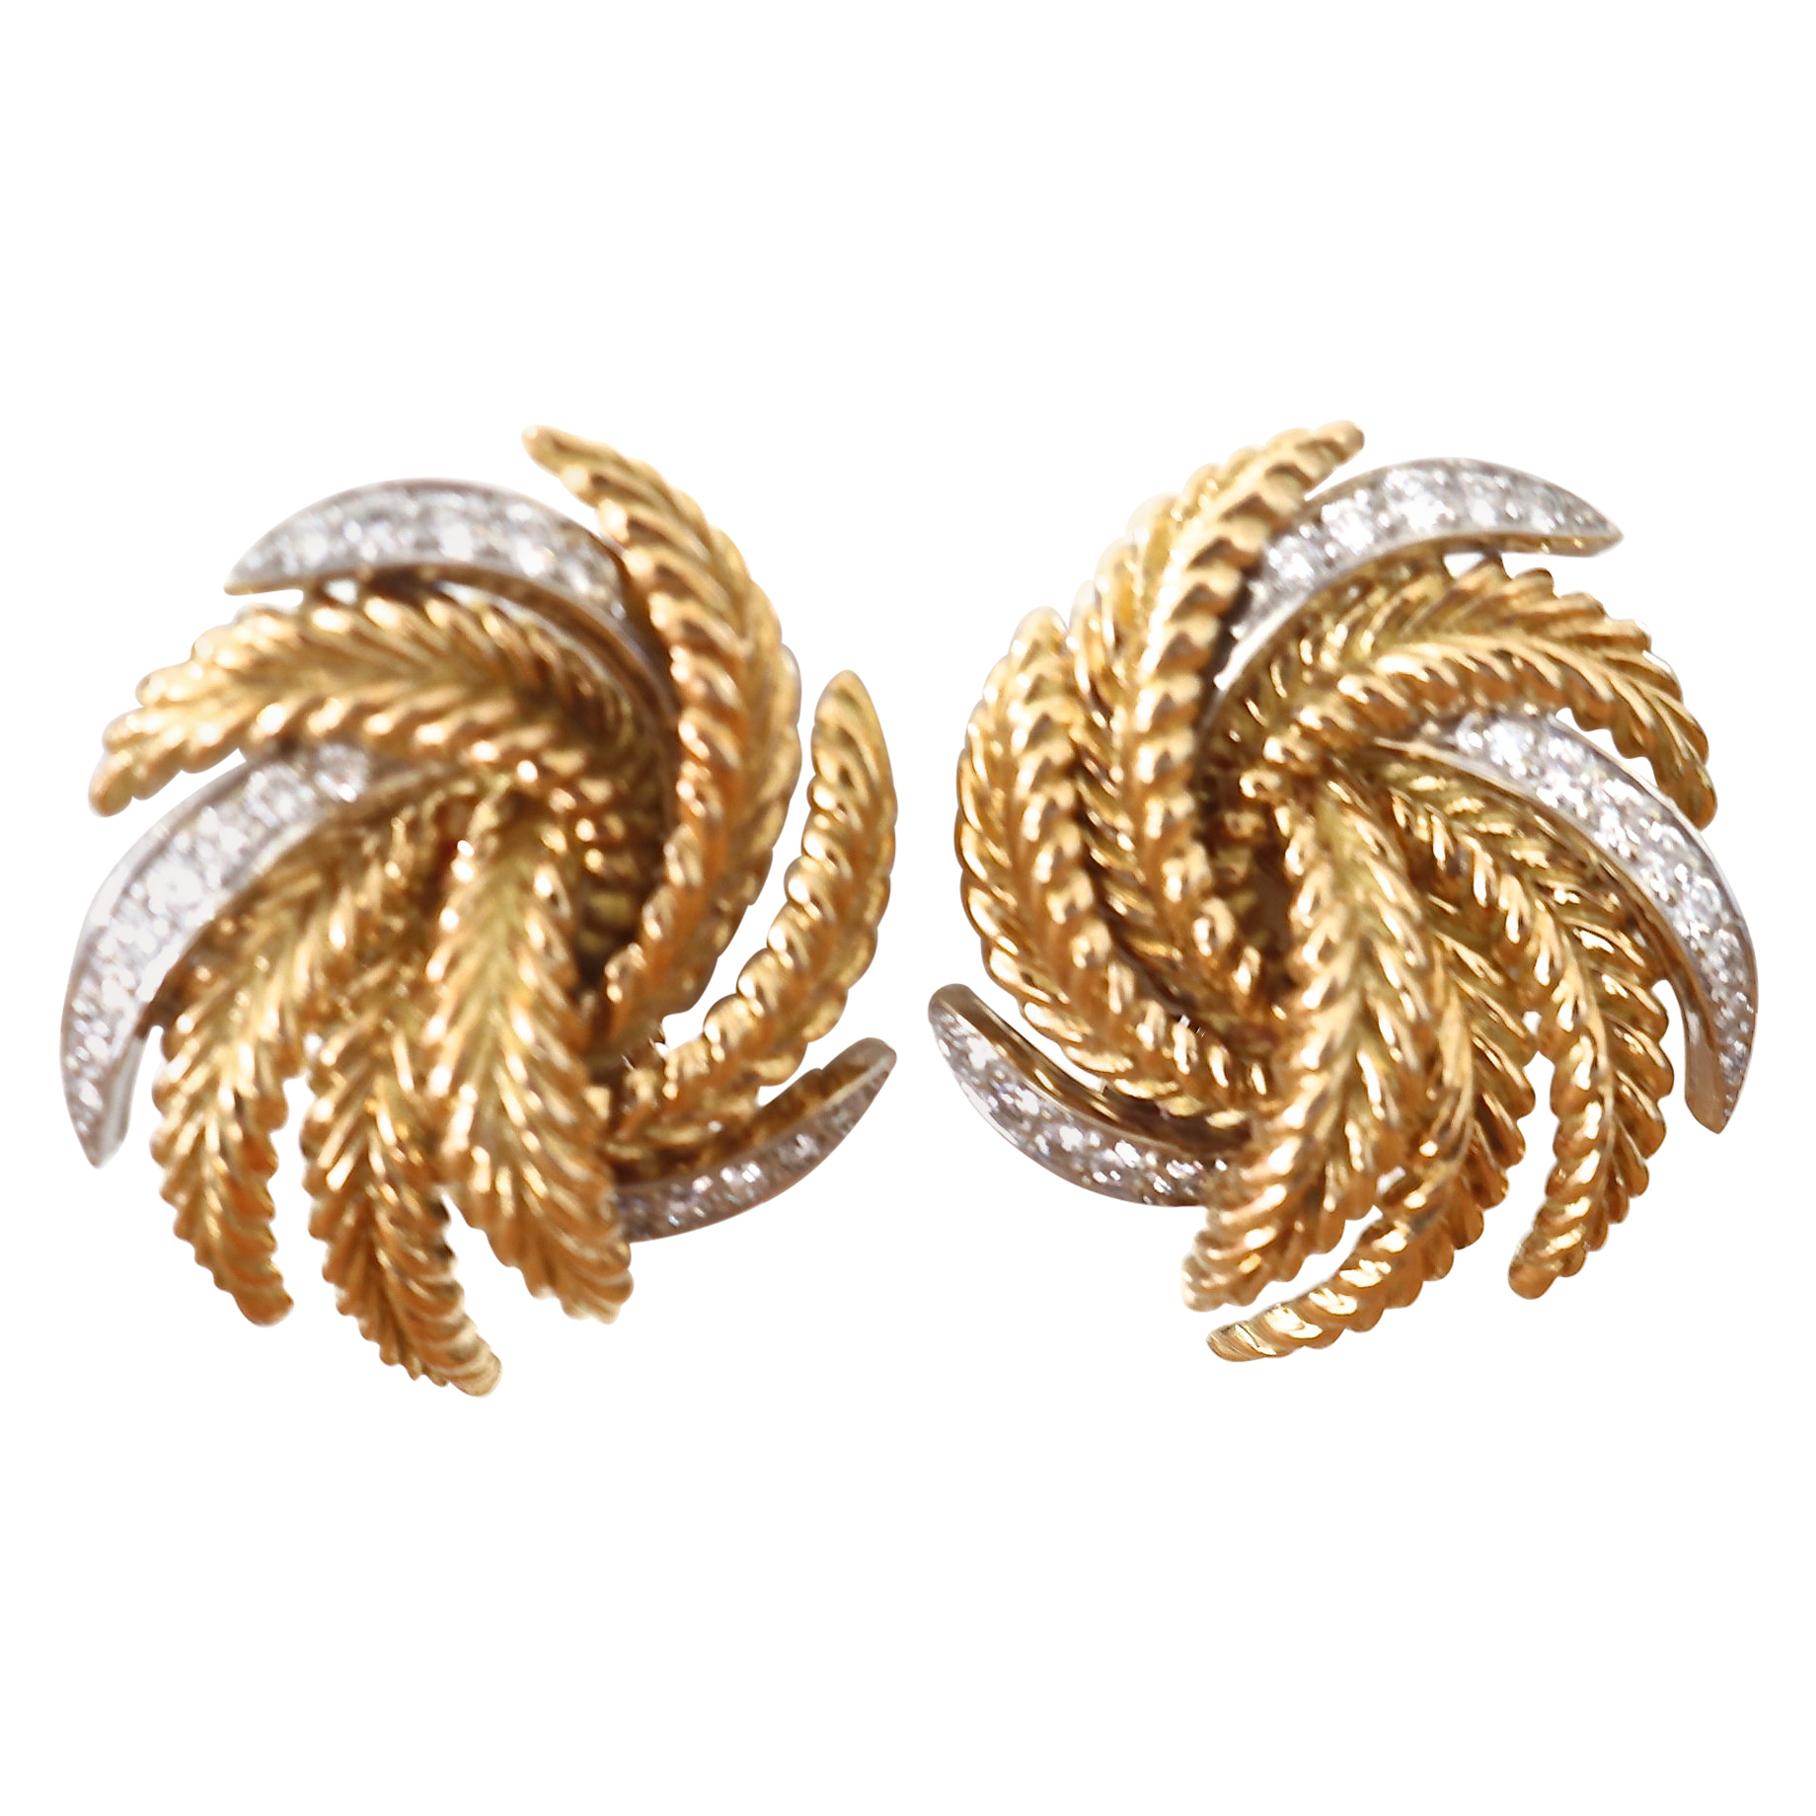 Vintage 1960s French Diamond Gold Earrings